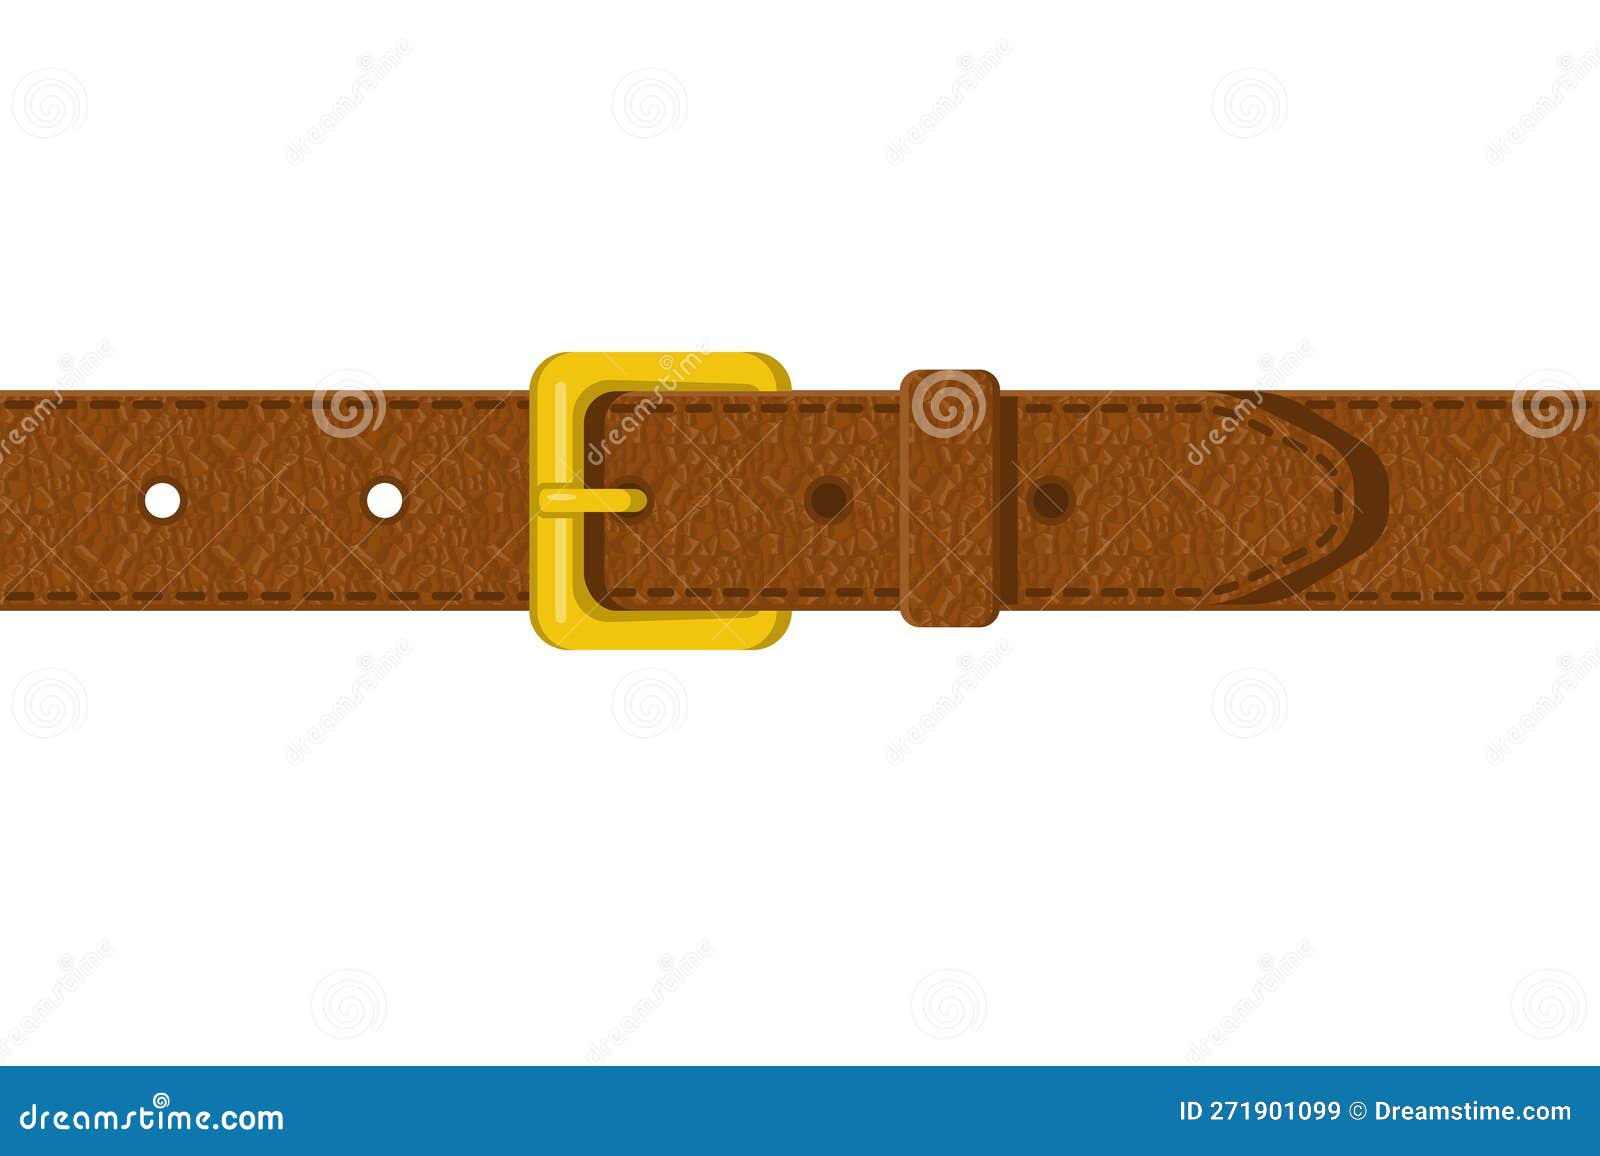 Brown Leather Belt. Clothing Element Stylish Accessorie Stock Vector ...